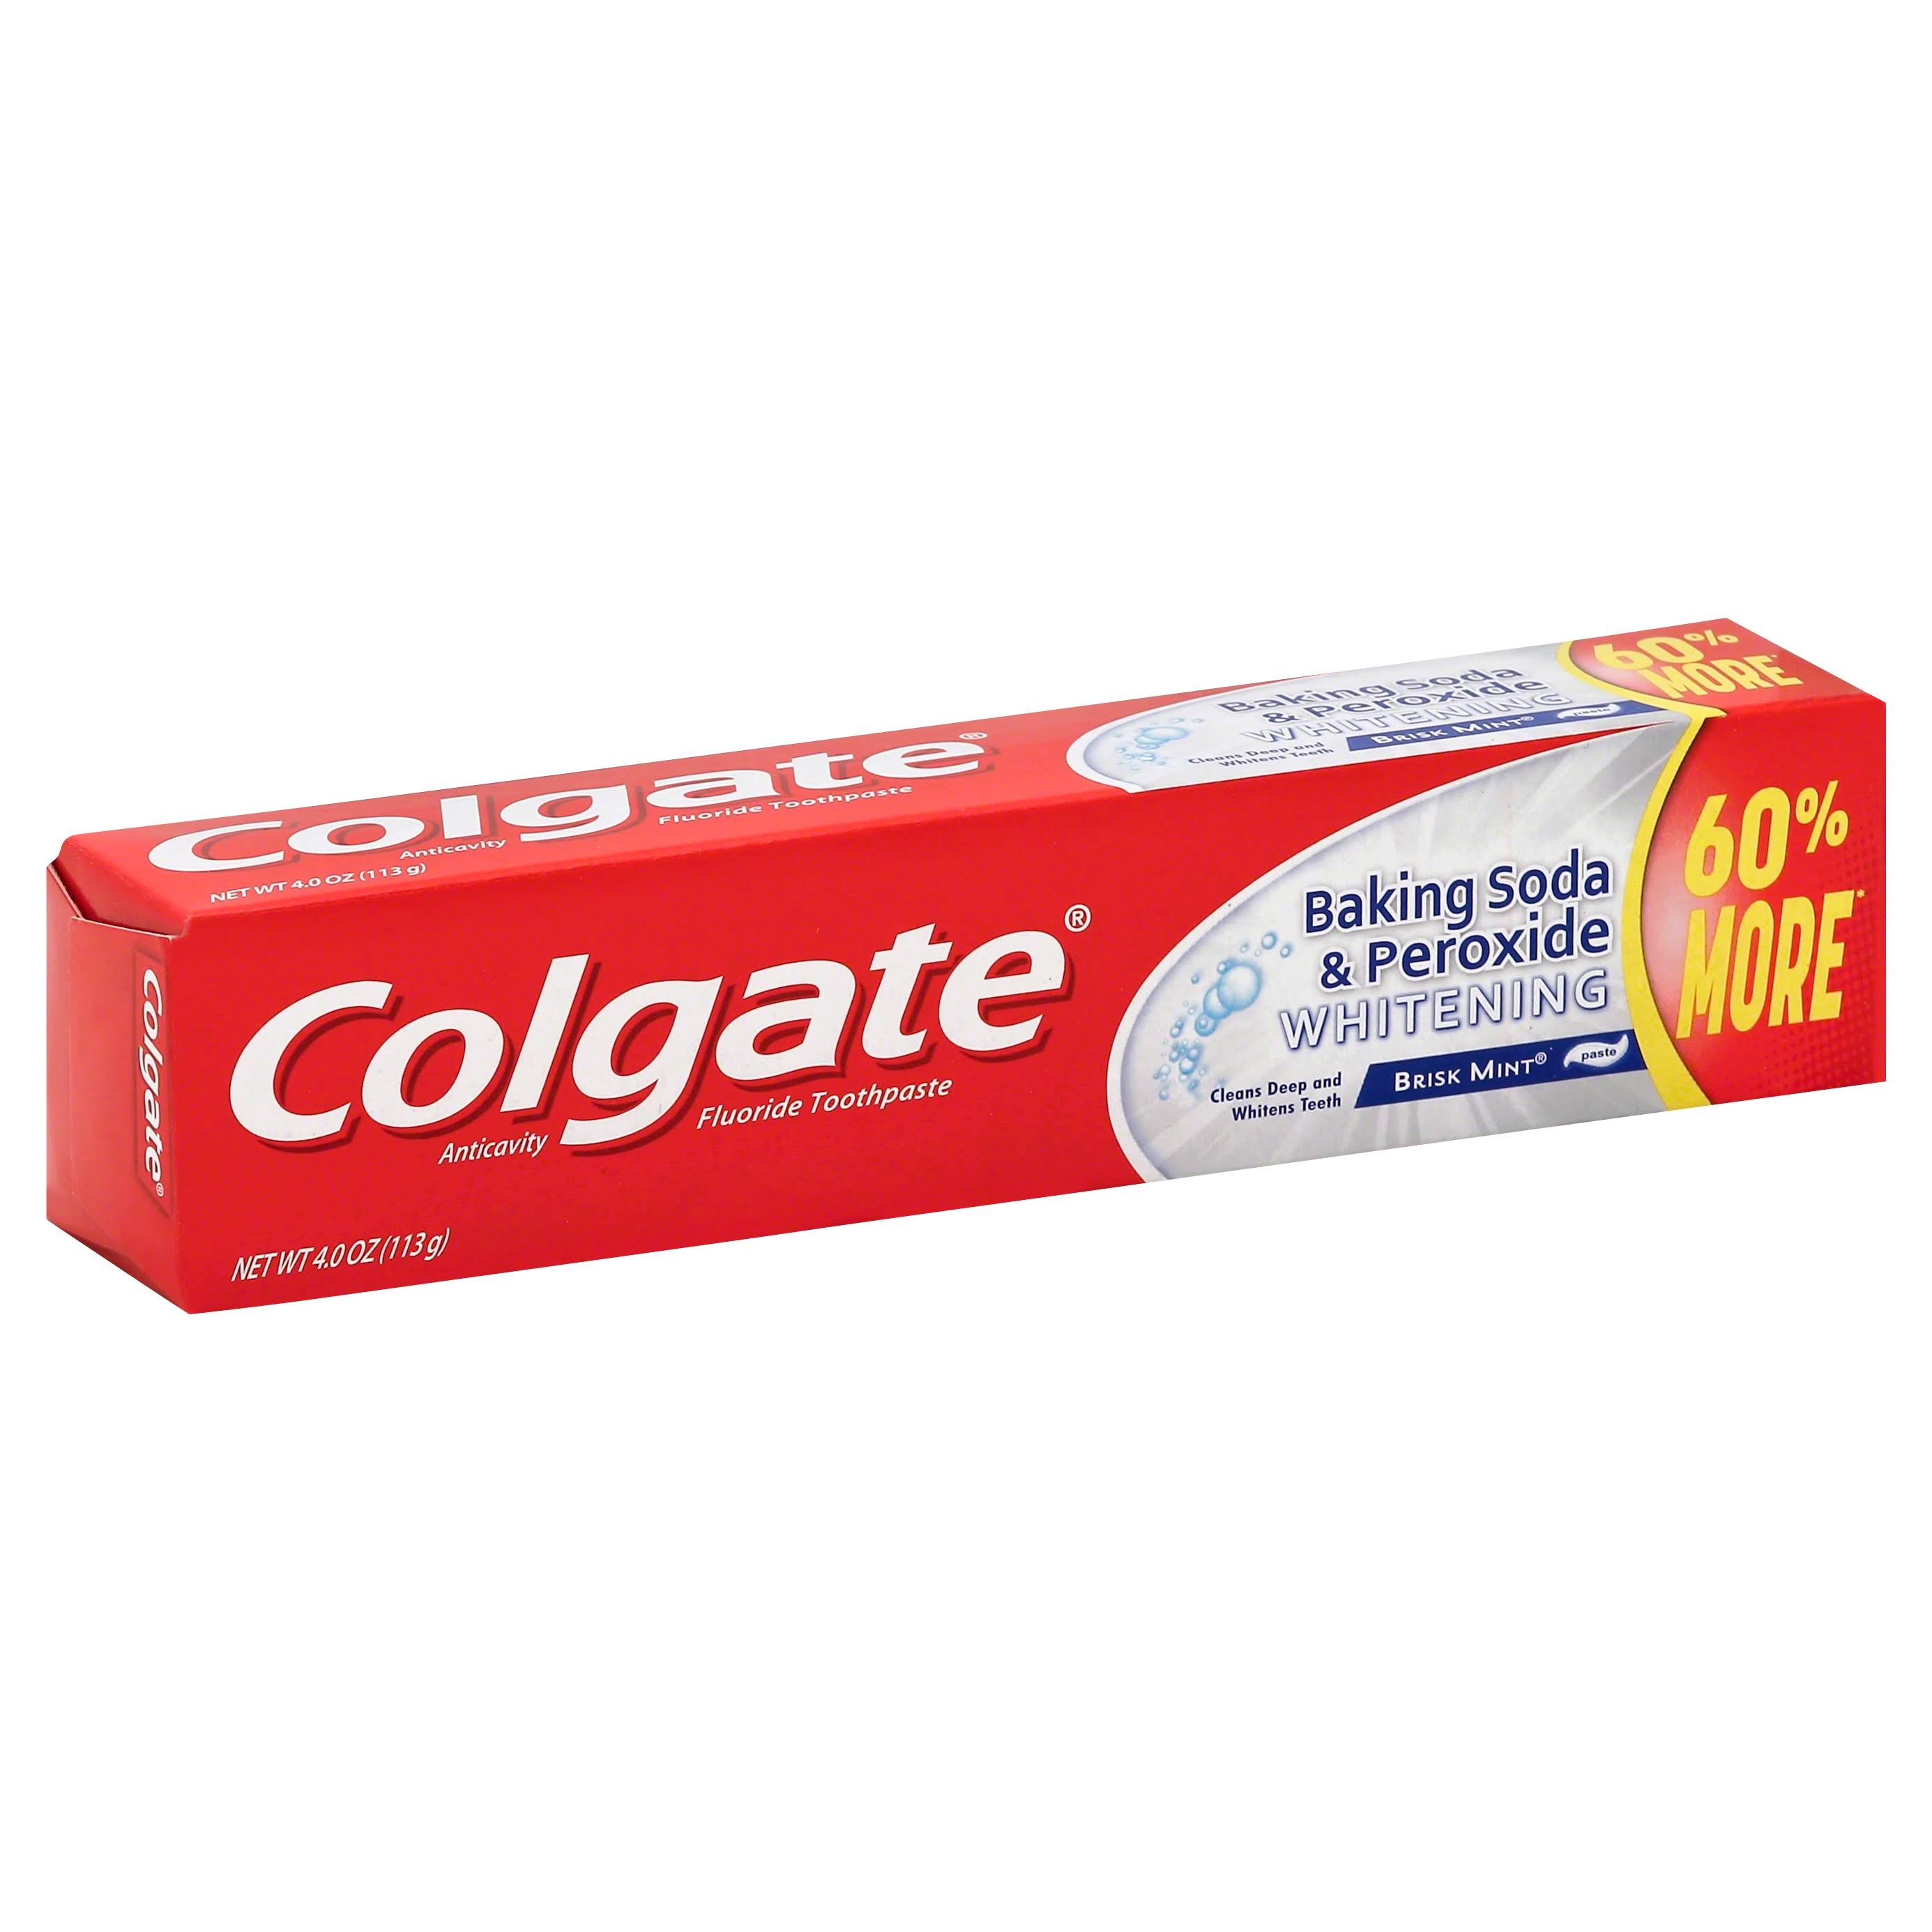 Colgate Baking Soda and Peroxide Whitening Bubbles Toothpaste - 4oz